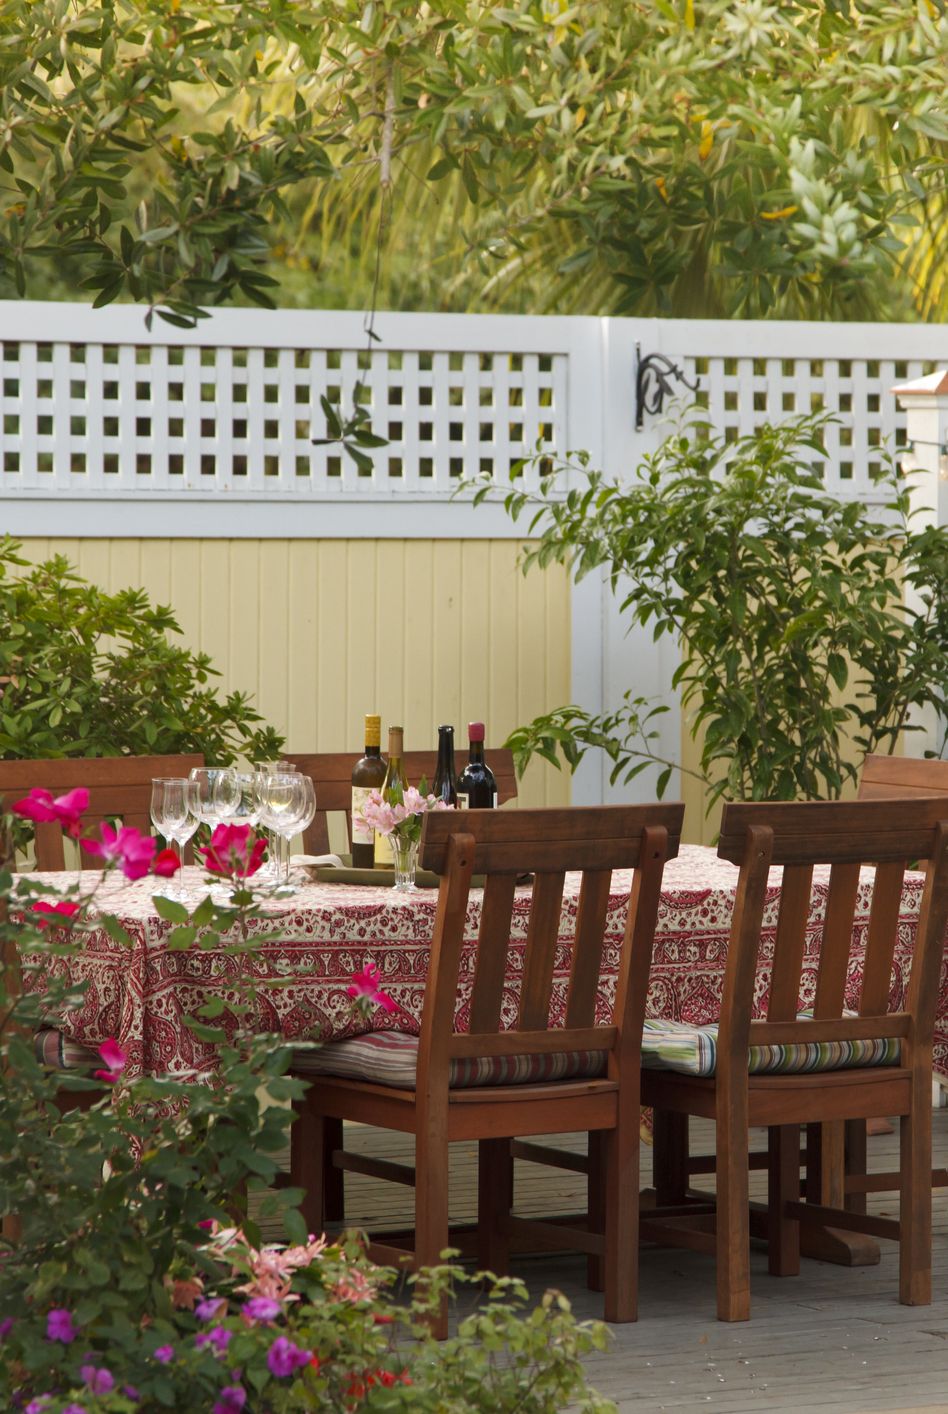 table set for garden party in backyard